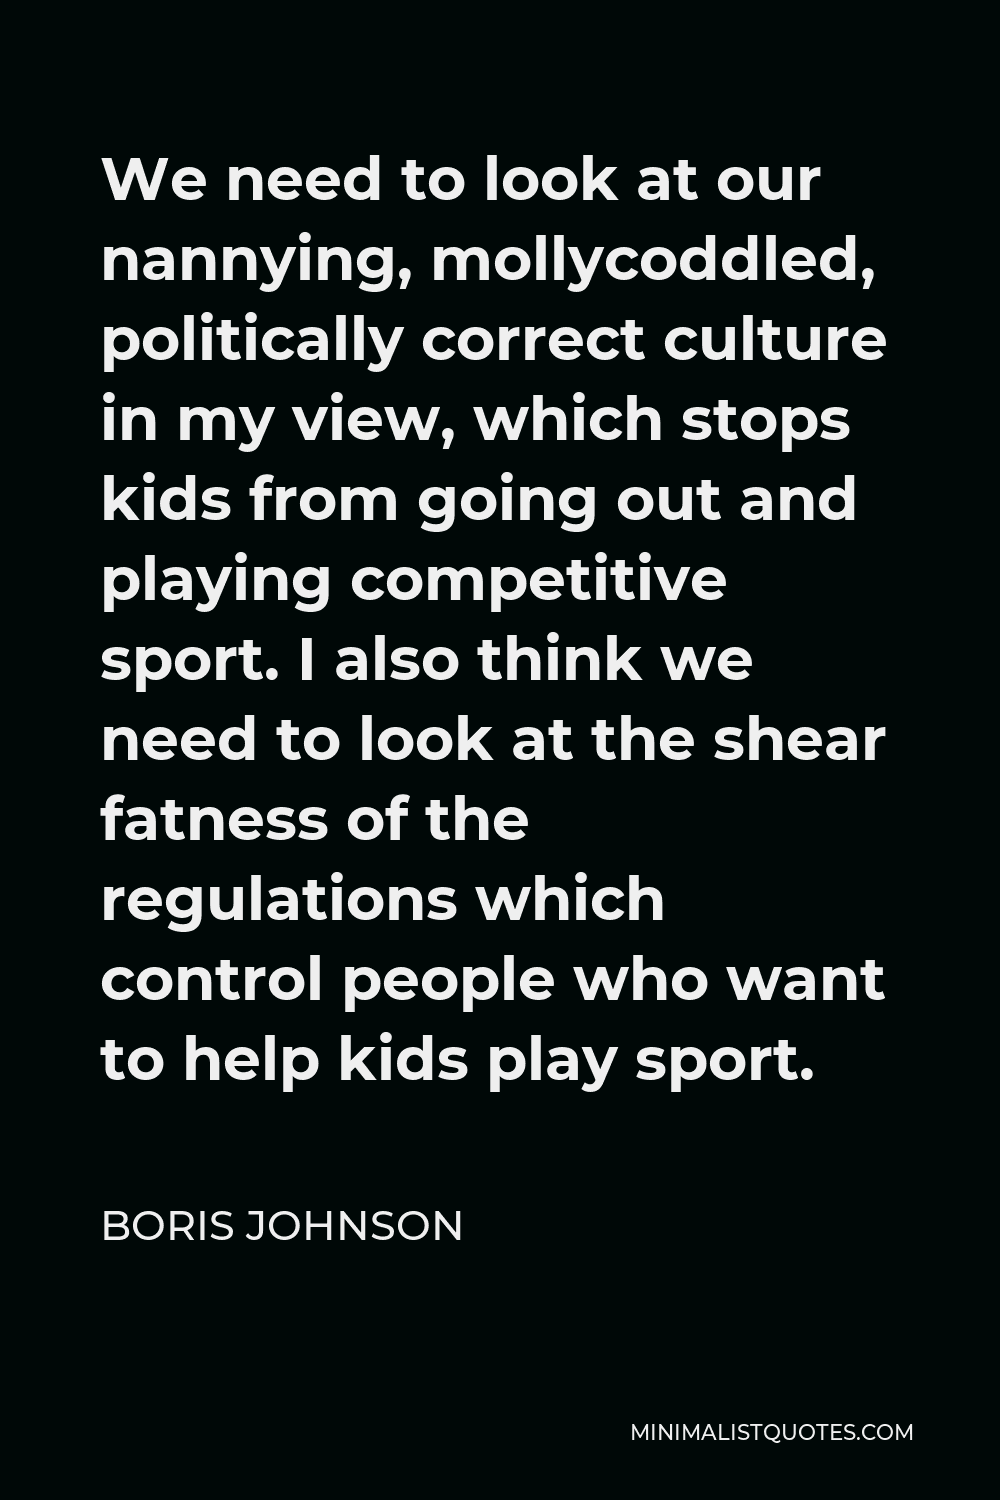 Boris Johnson Quote - We need to look at our nannying, mollycoddled, politically correct culture in my view, which stops kids from going out and playing competitive sport. I also think we need to look at the shear fatness of the regulations which control people who want to help kids play sport.